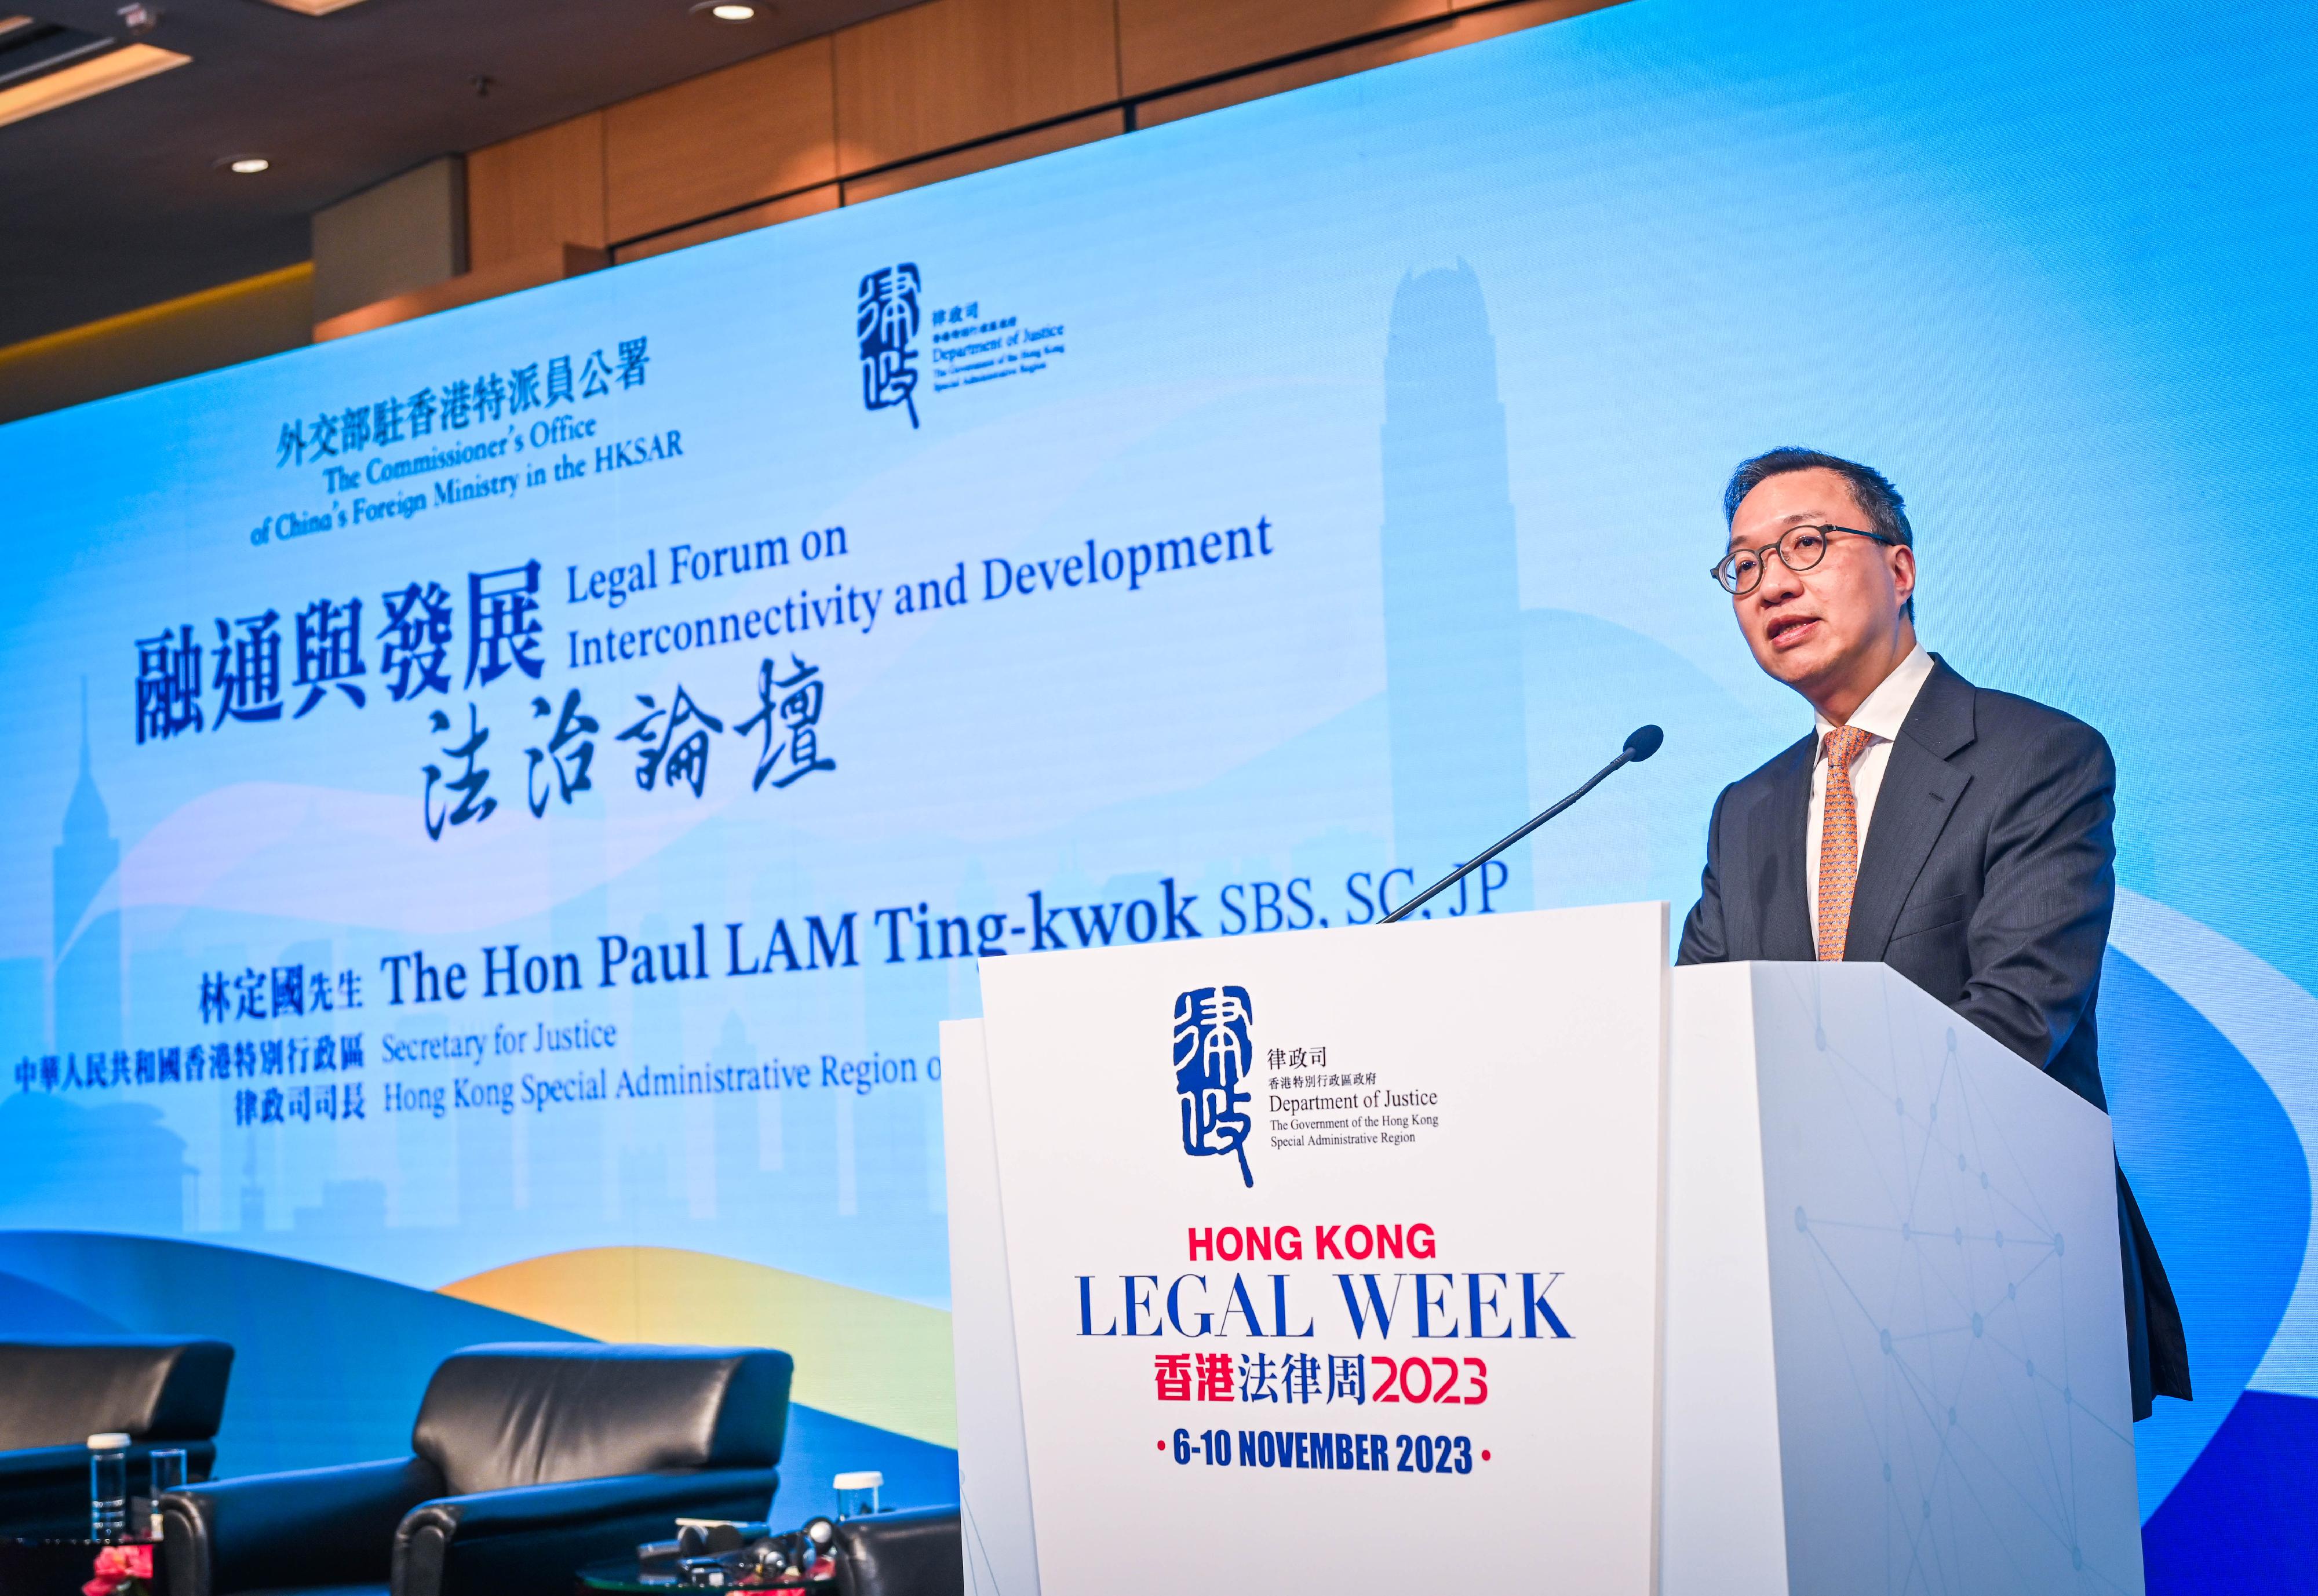 As part of the Hong Kong Legal Week 2023, the Legal Forum on Interconnectivity and Development co-organised by the Office of the Commissioner of the Ministry of Foreign Affairs in the Hong Kong Special Administrative Region and the Department of Justice was held successfully today (November 7). Photo shows the Secretary for Justice, Mr Paul Lam, SC, delivering his closing remarks.
